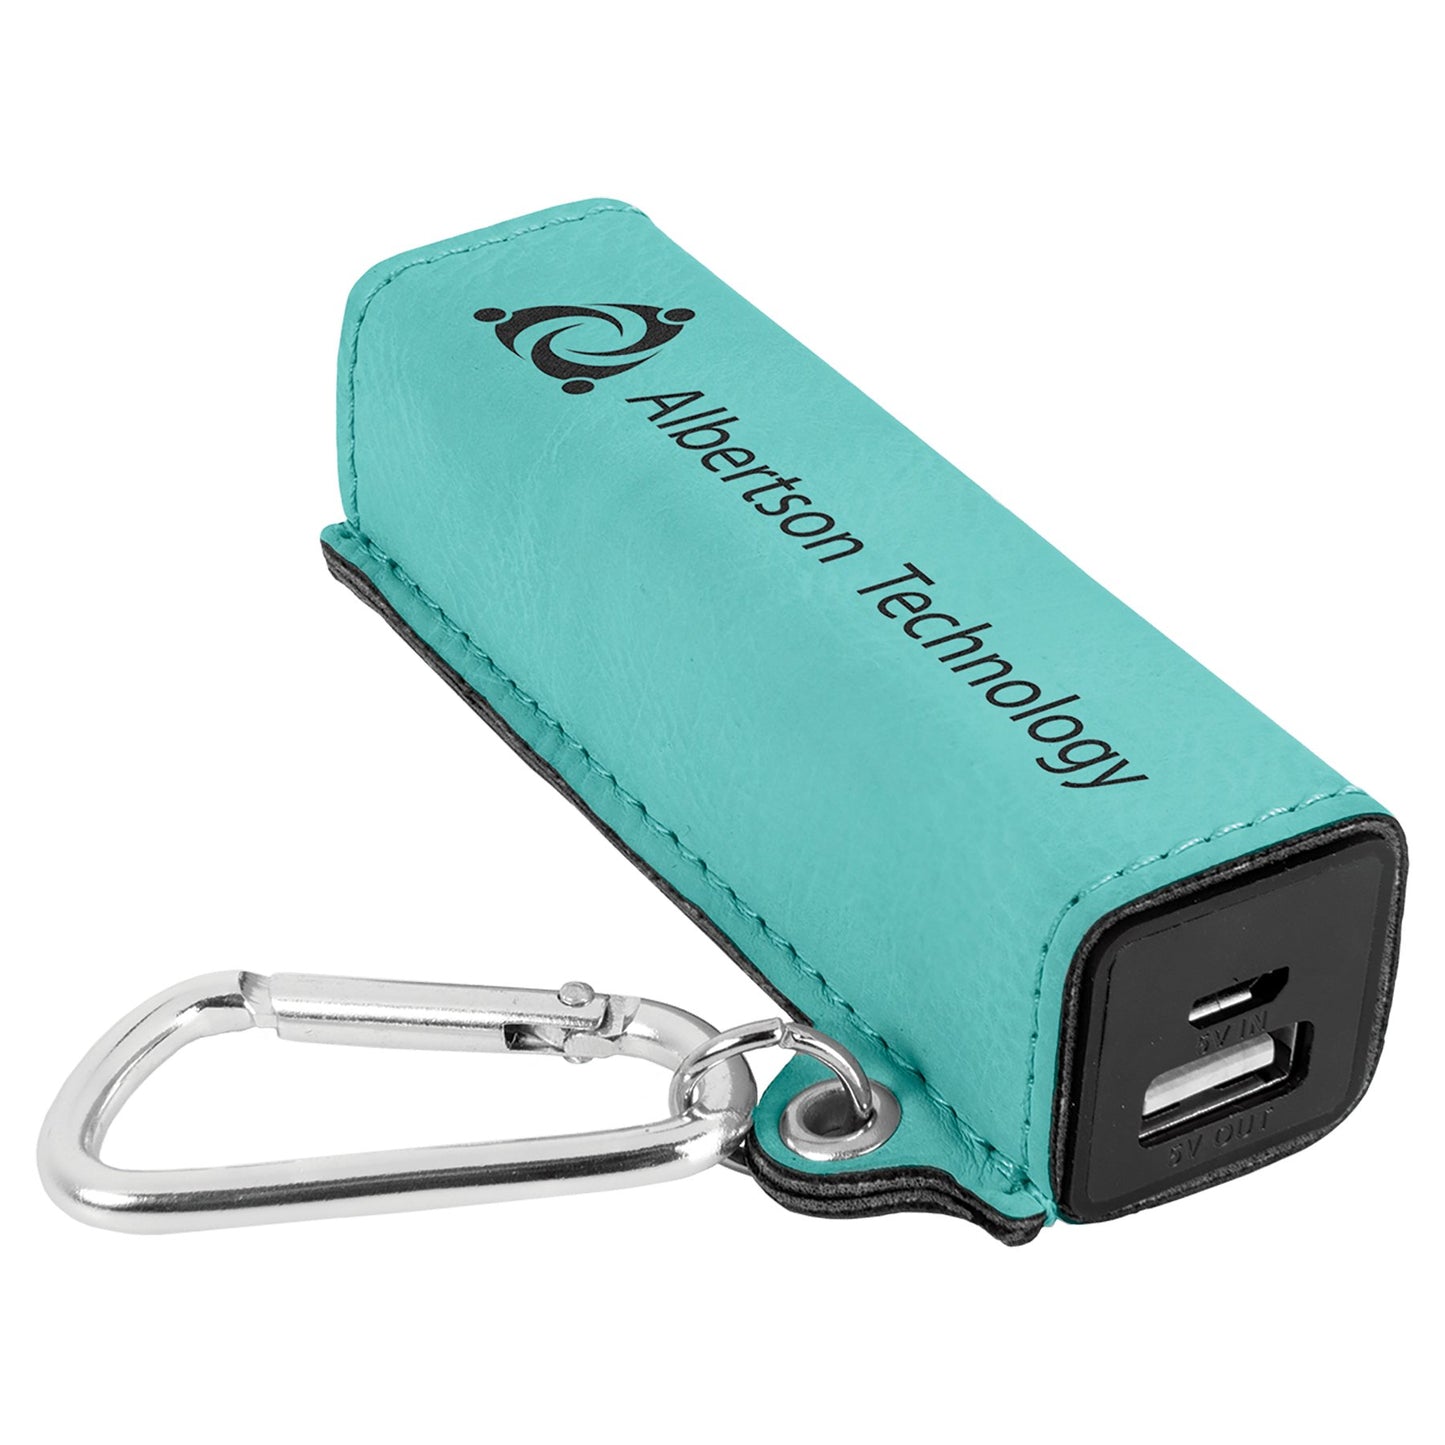 Laserable Leatherette 2200 mAh Power Bank with USB Cord - Legacy Creator IncTeal